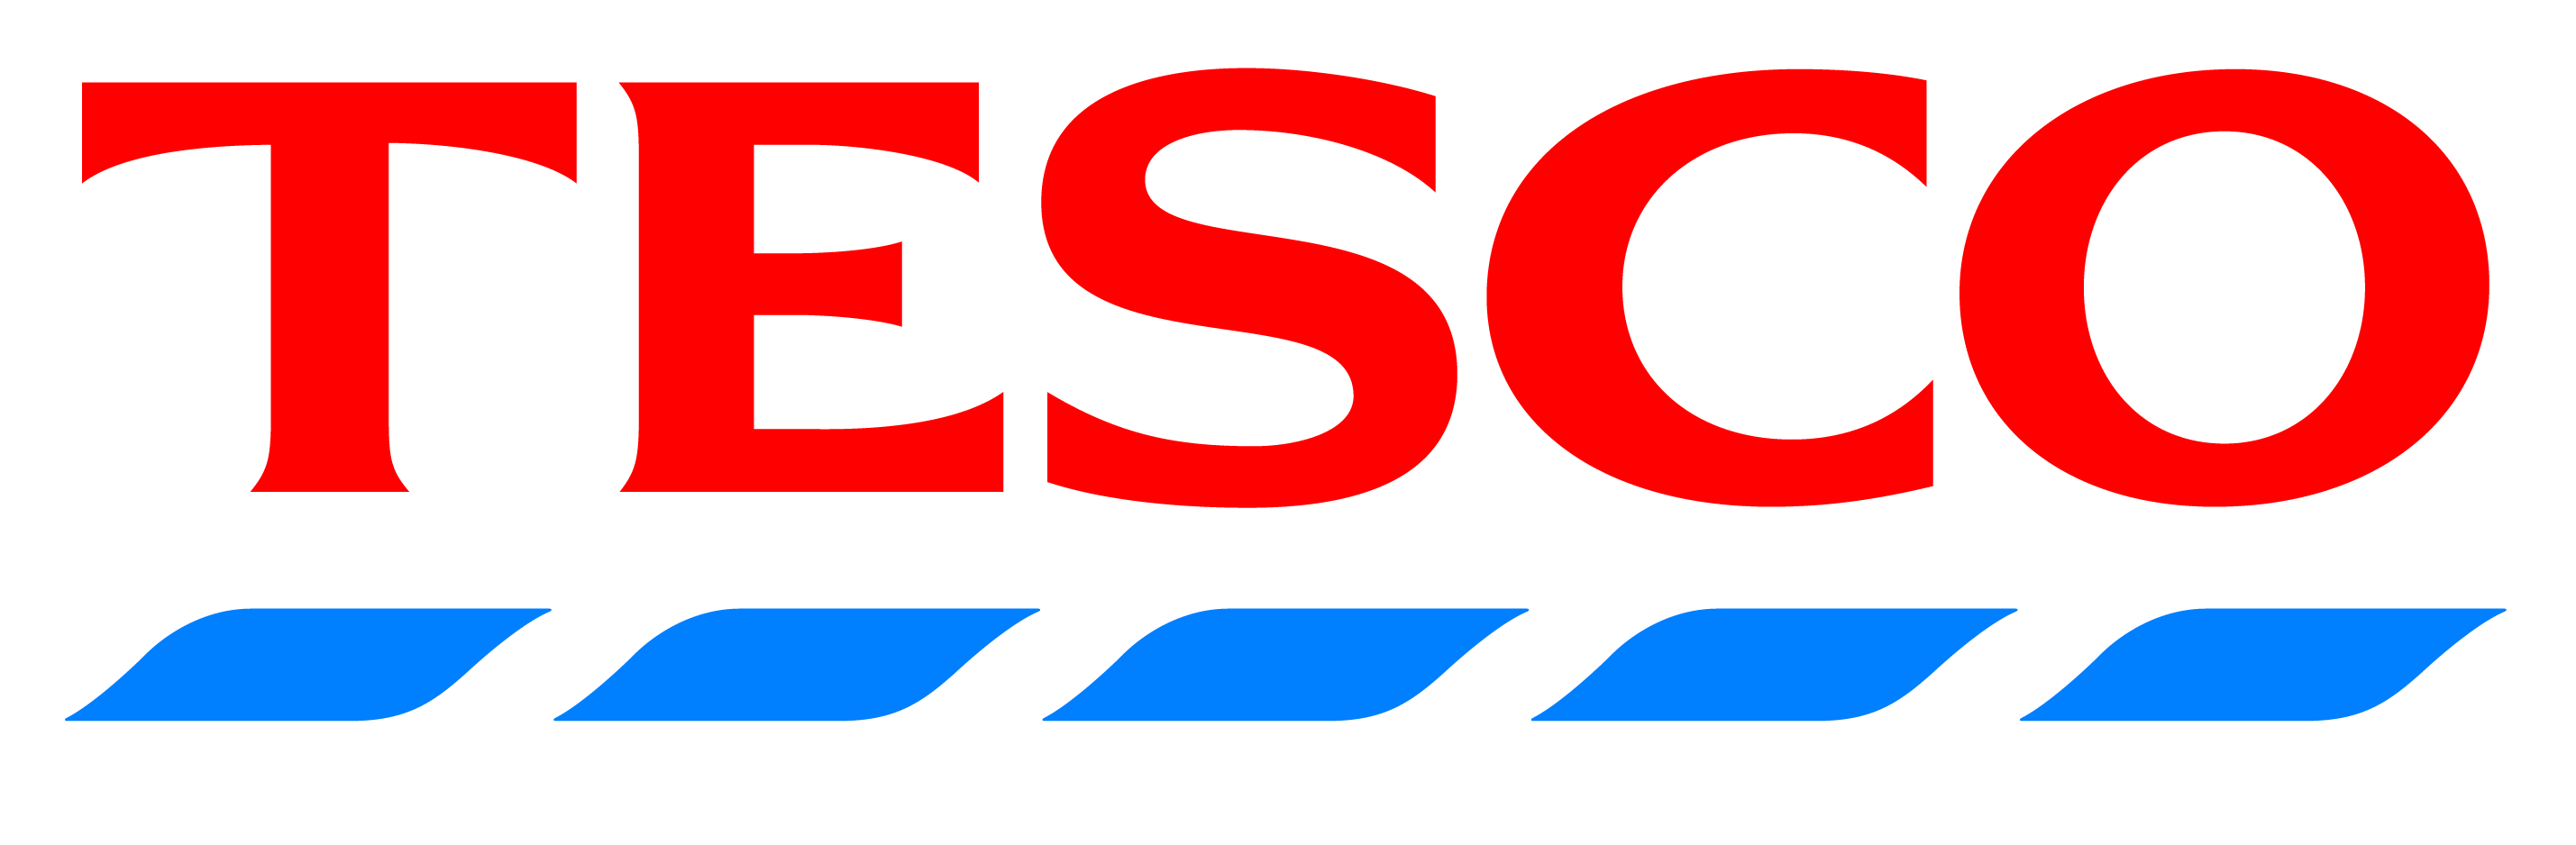 Text Tesco Ireland Area Free Clipart HD PNG Image